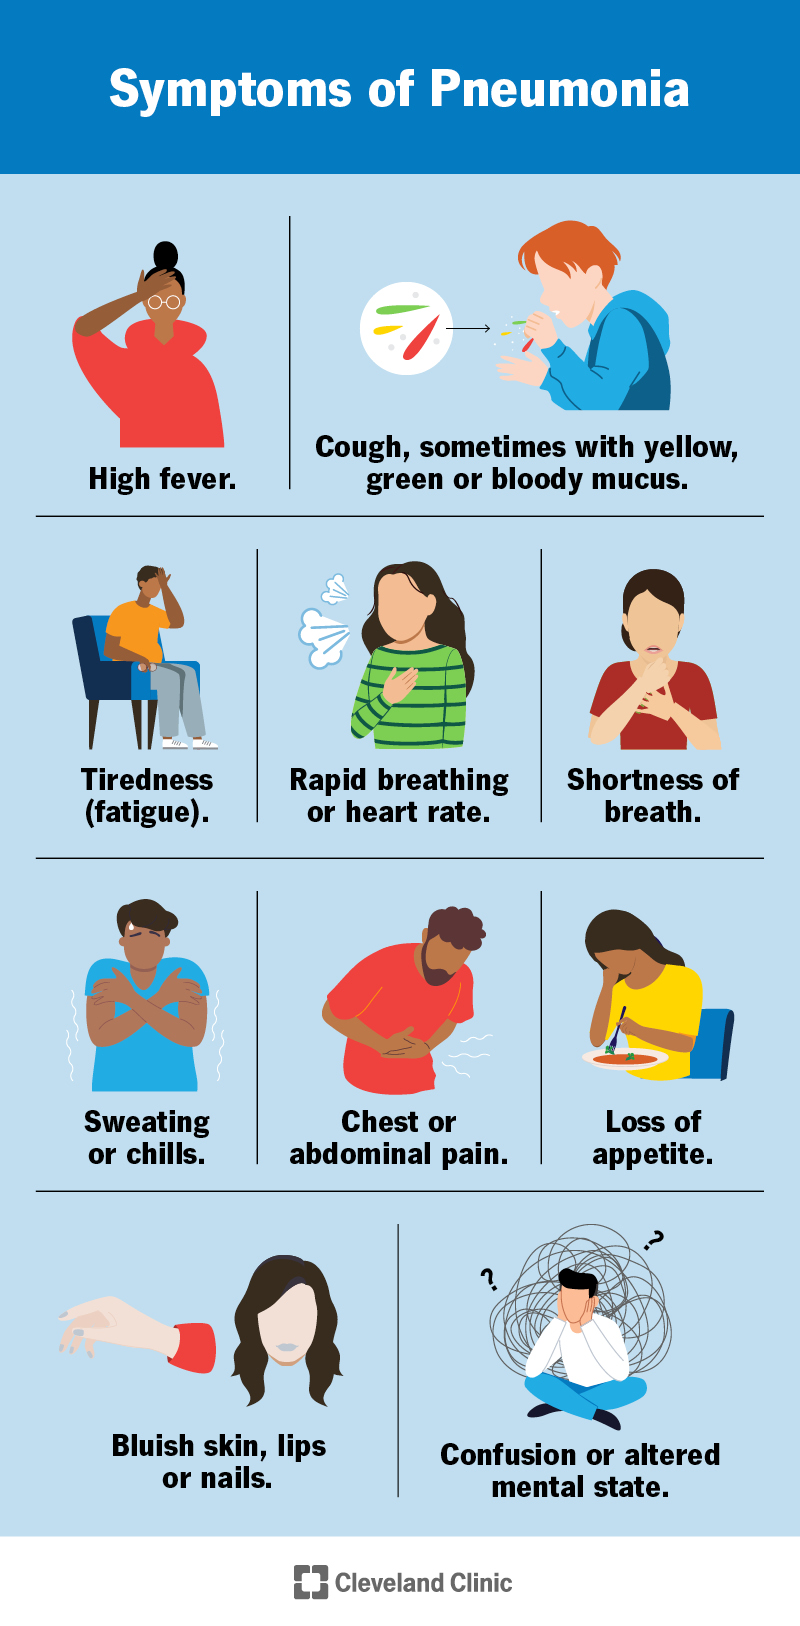 Symptoms of pneumonia include high fever, cough, fatigue, shortness of breath, sweating or chills, rapid heartrate and more.